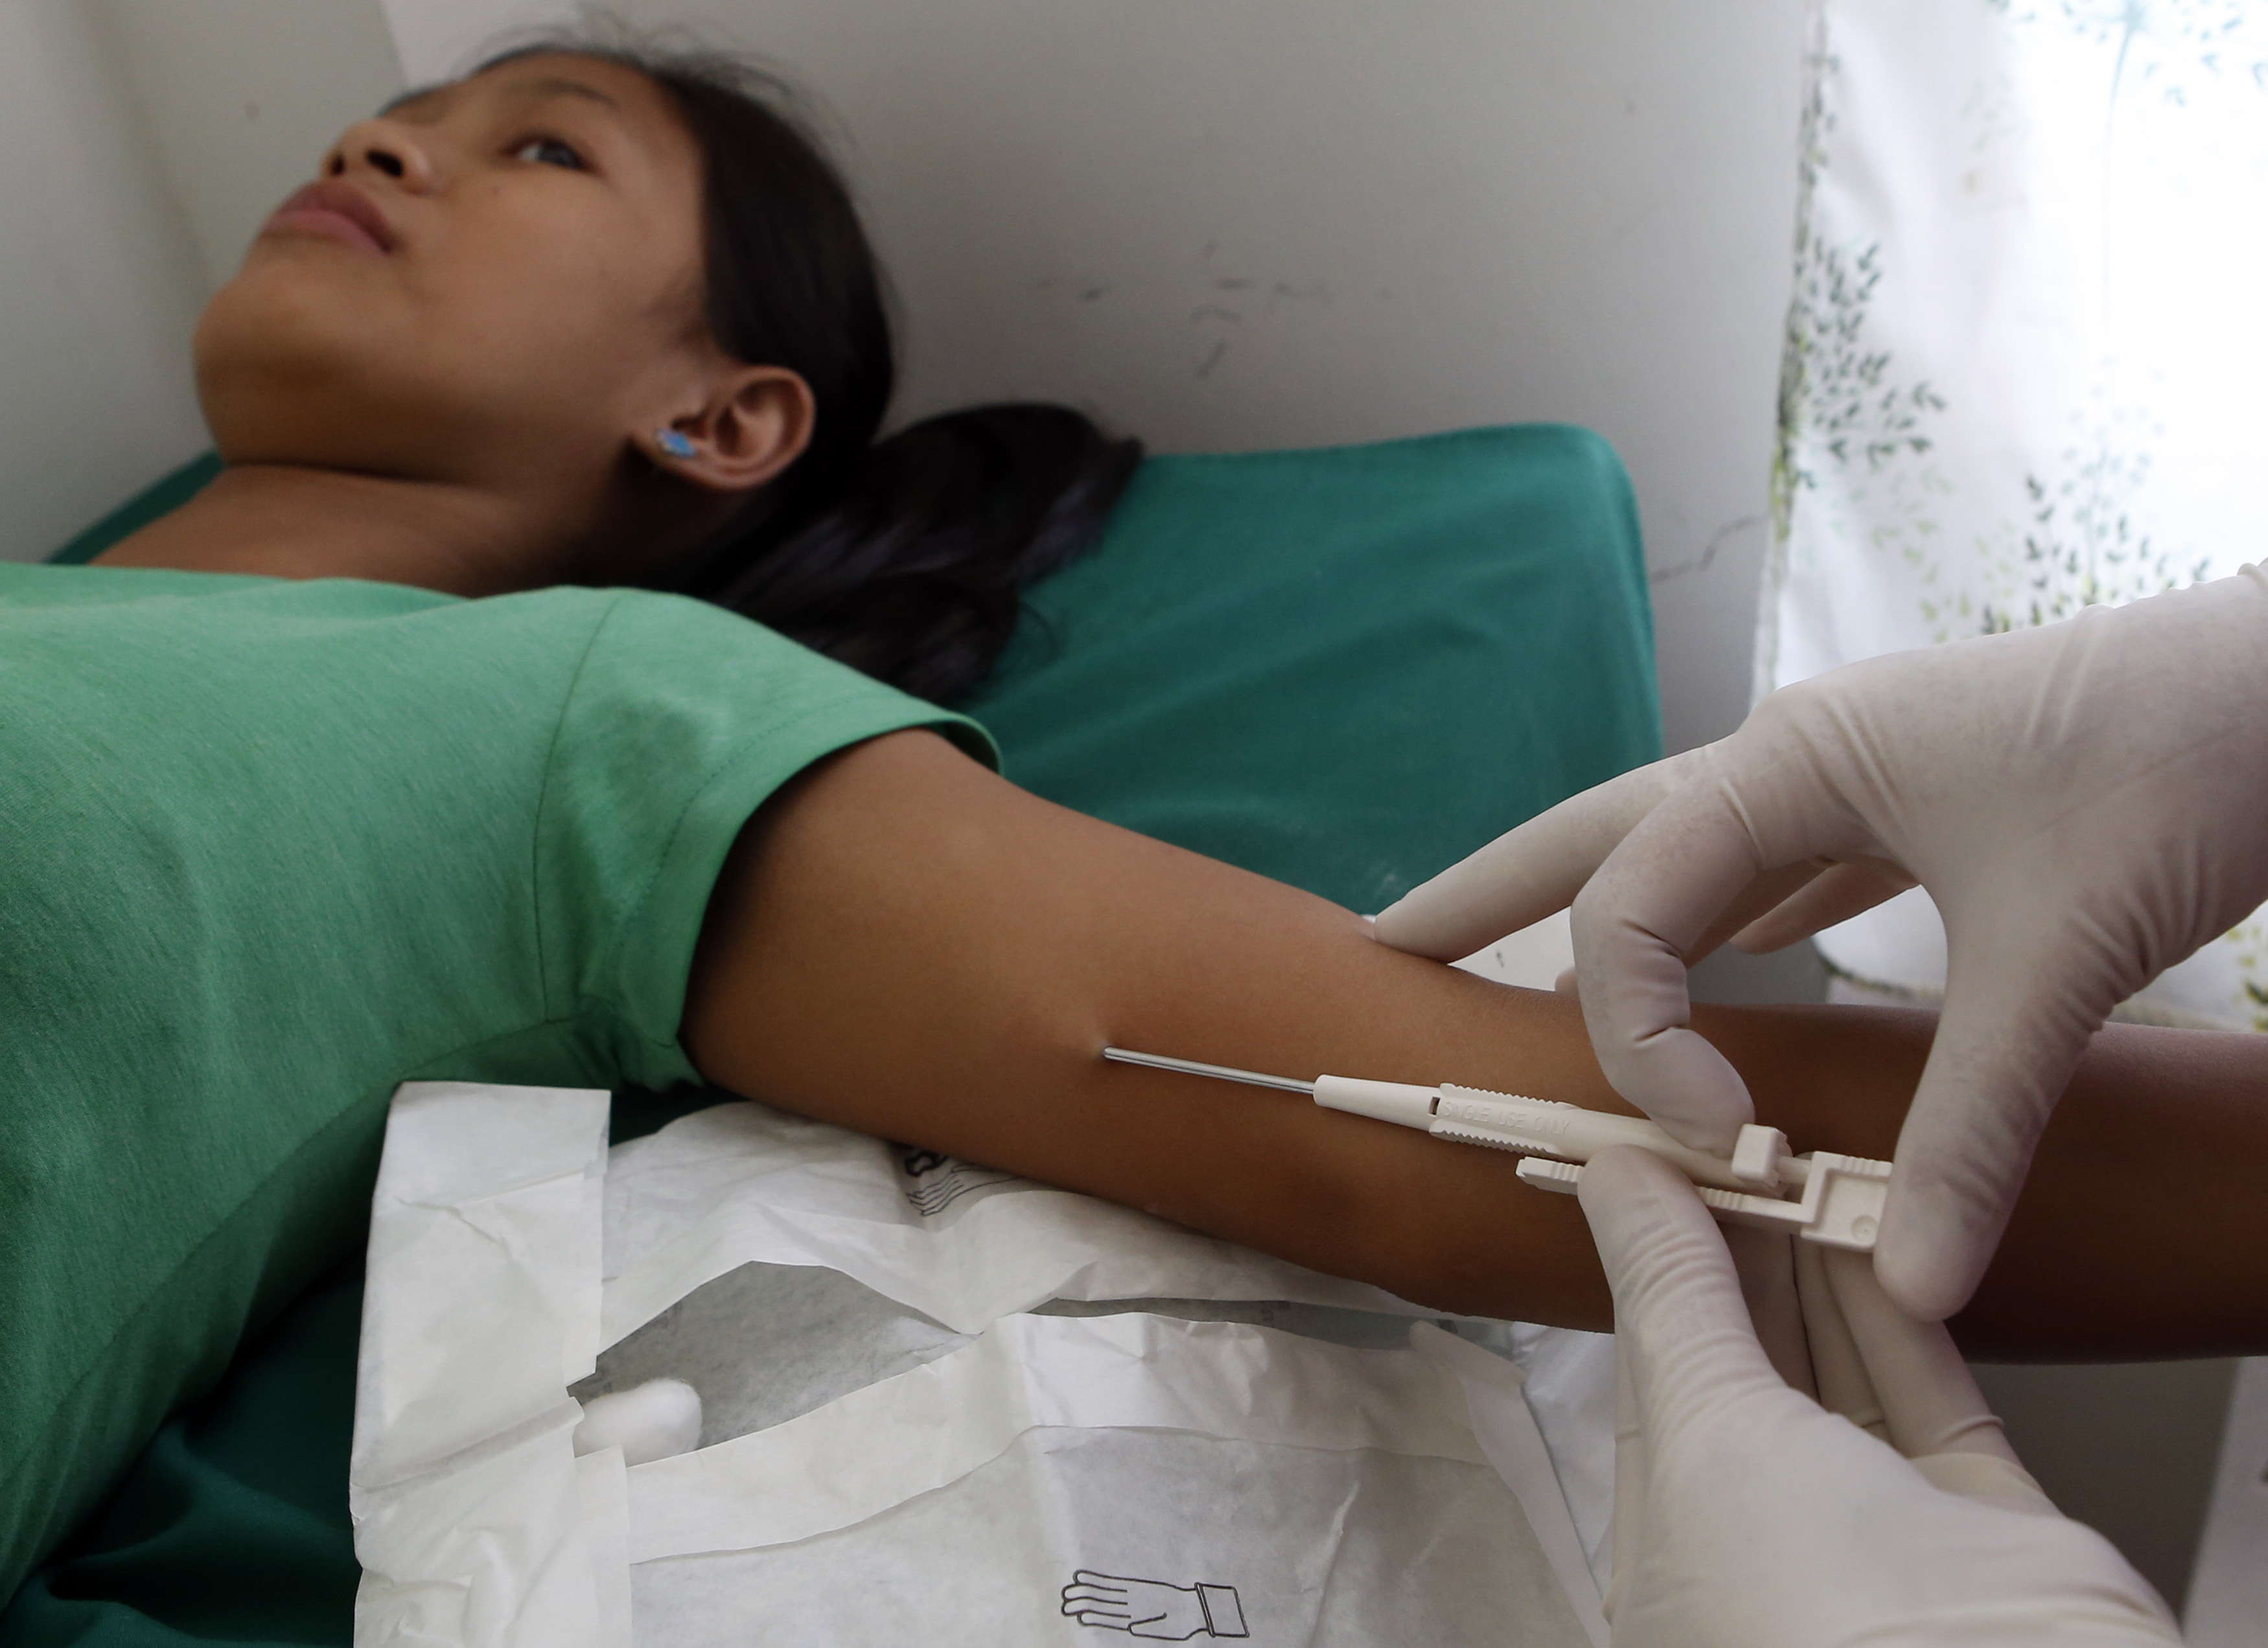 A 16-year-old mother receives a free contraceptive implant during a reproductive health medical mission organized by the United Nations Population Fund (UNFPA) in Tondo, Manila